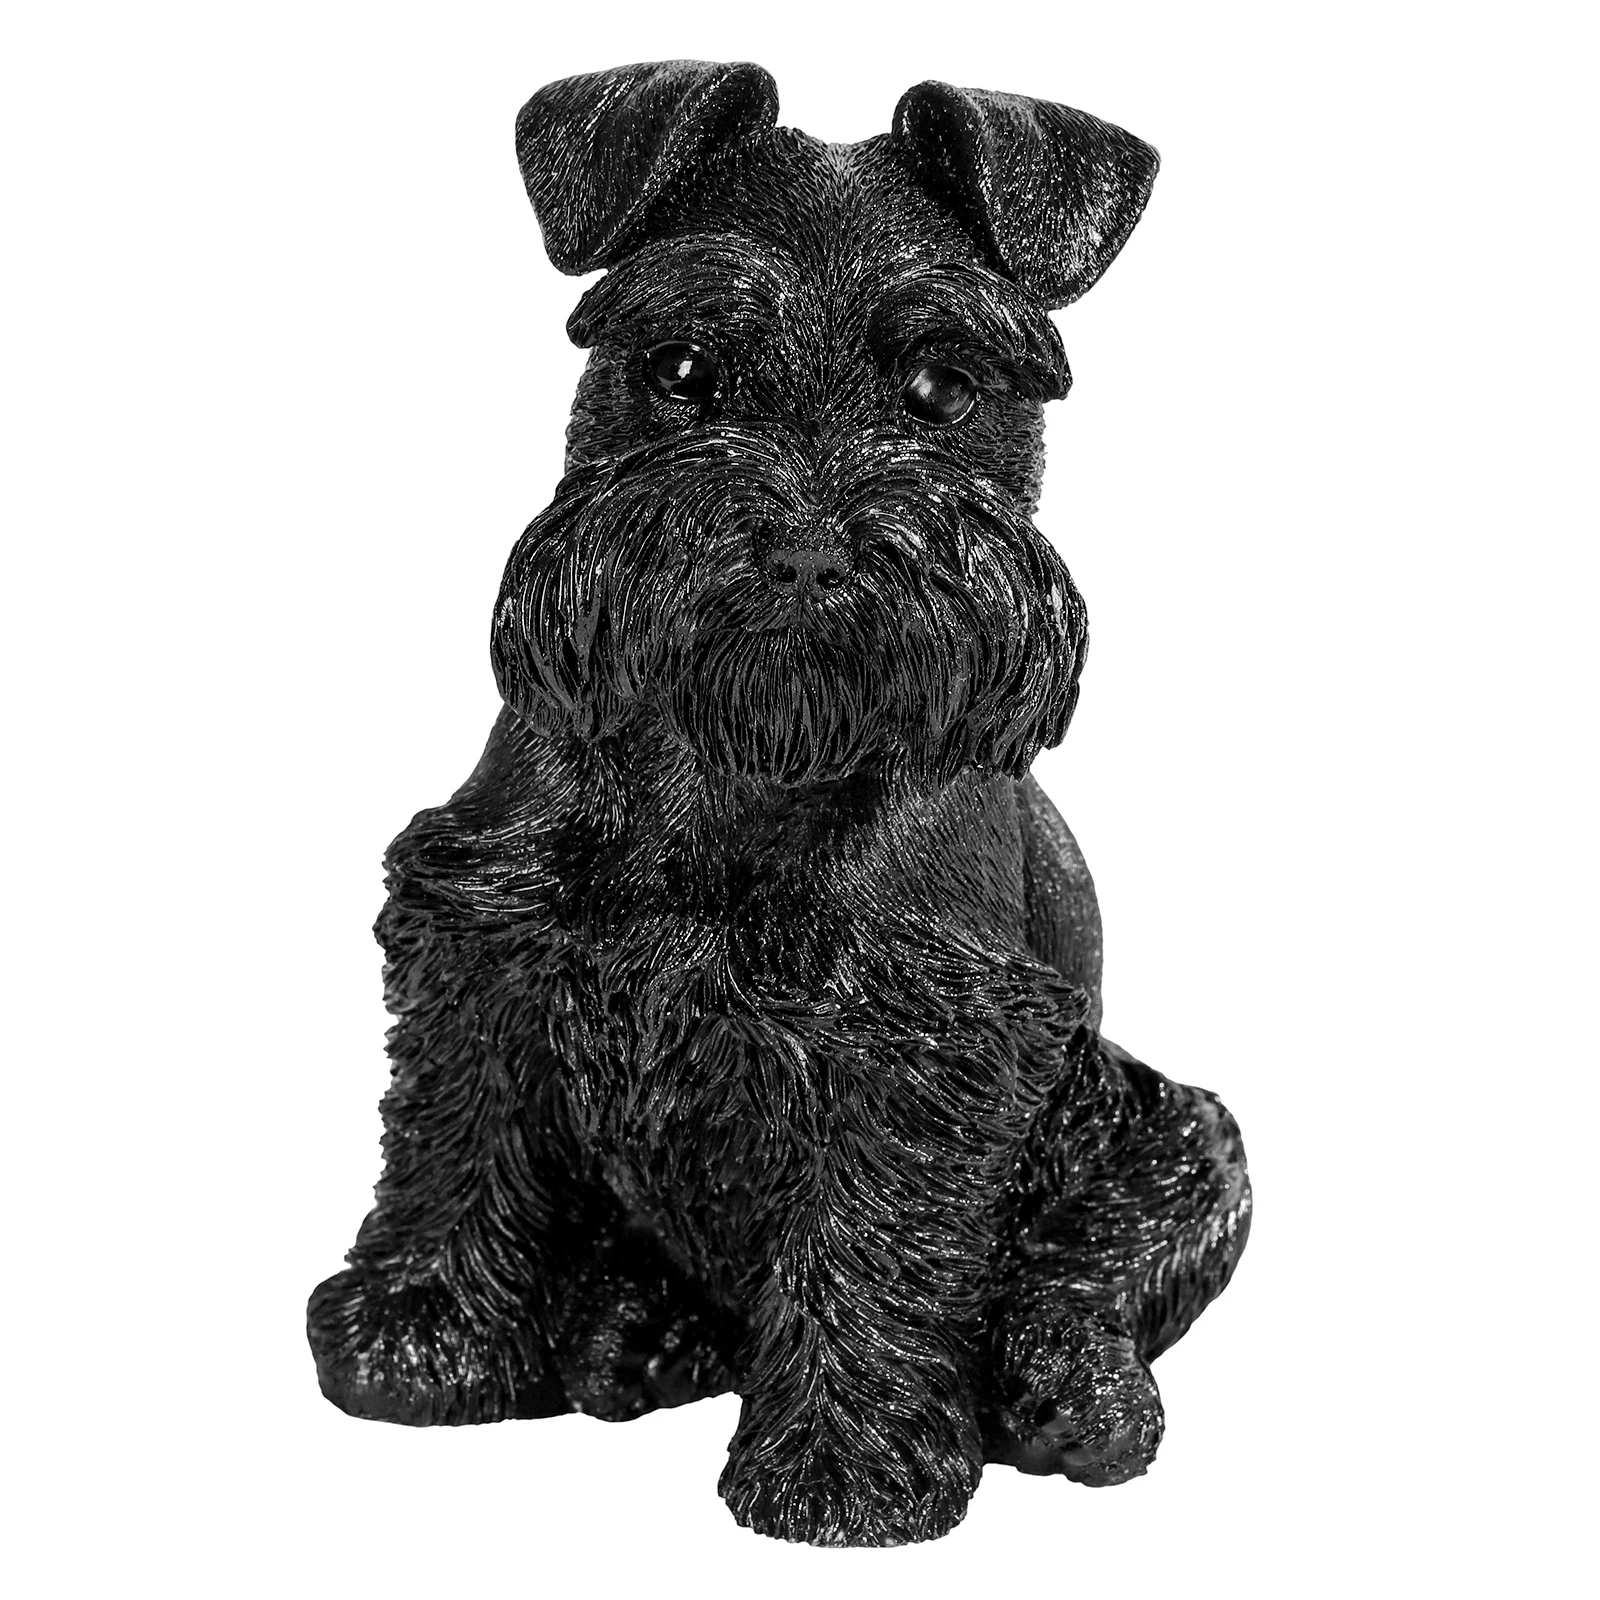 Lovely Mini Schnauzer Puppy Stone Statue Carved Black Obsidian Animal Figurine For Home Decor wooden christmas train ornaments retro decor xmas model gift water table toys desktop home decorative prop lovely adorn